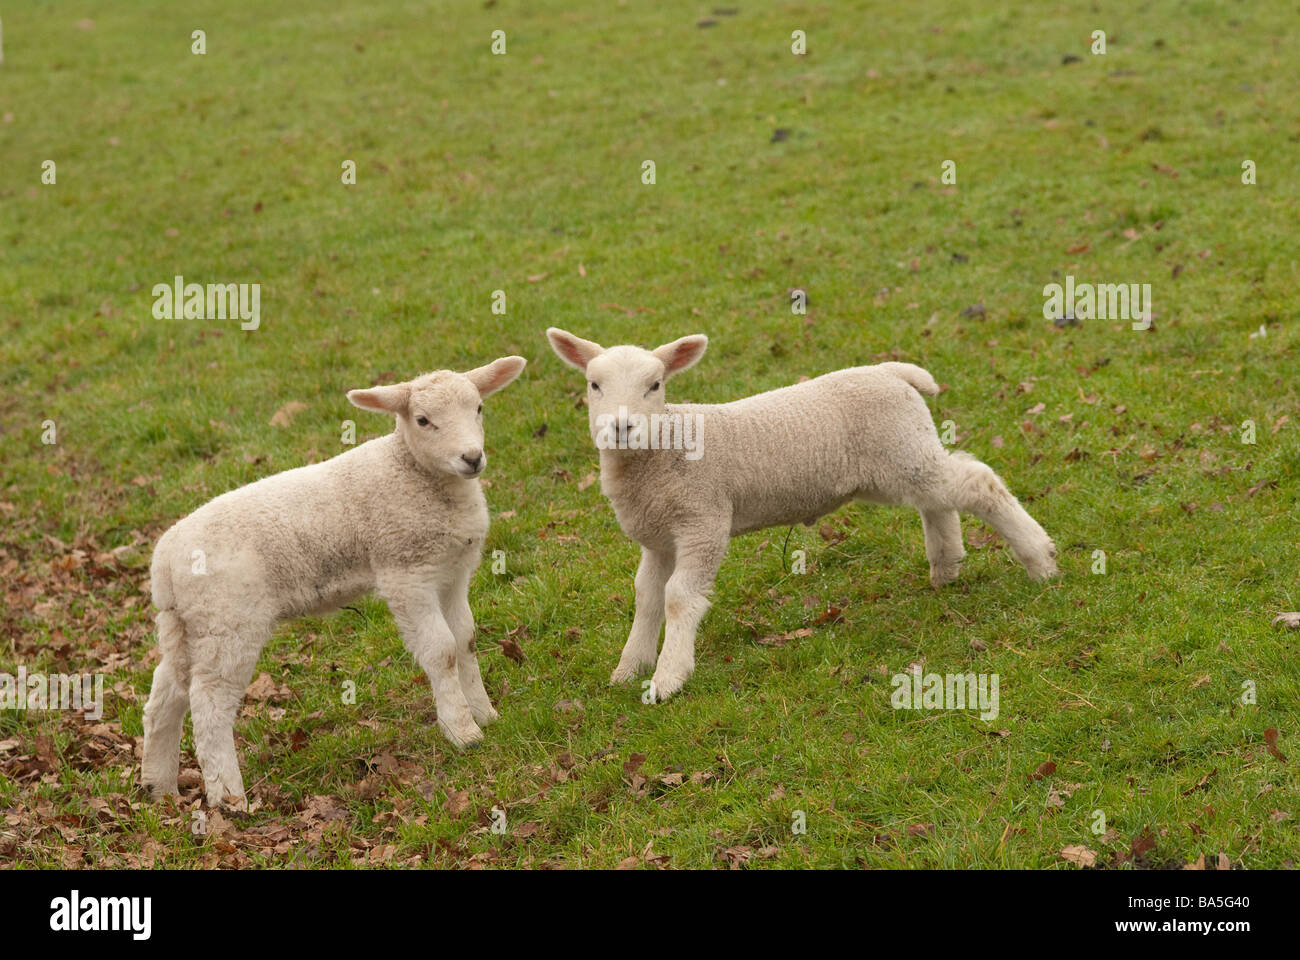 Pair of young lambs standing face to face in a field looking at camera Stock Photo